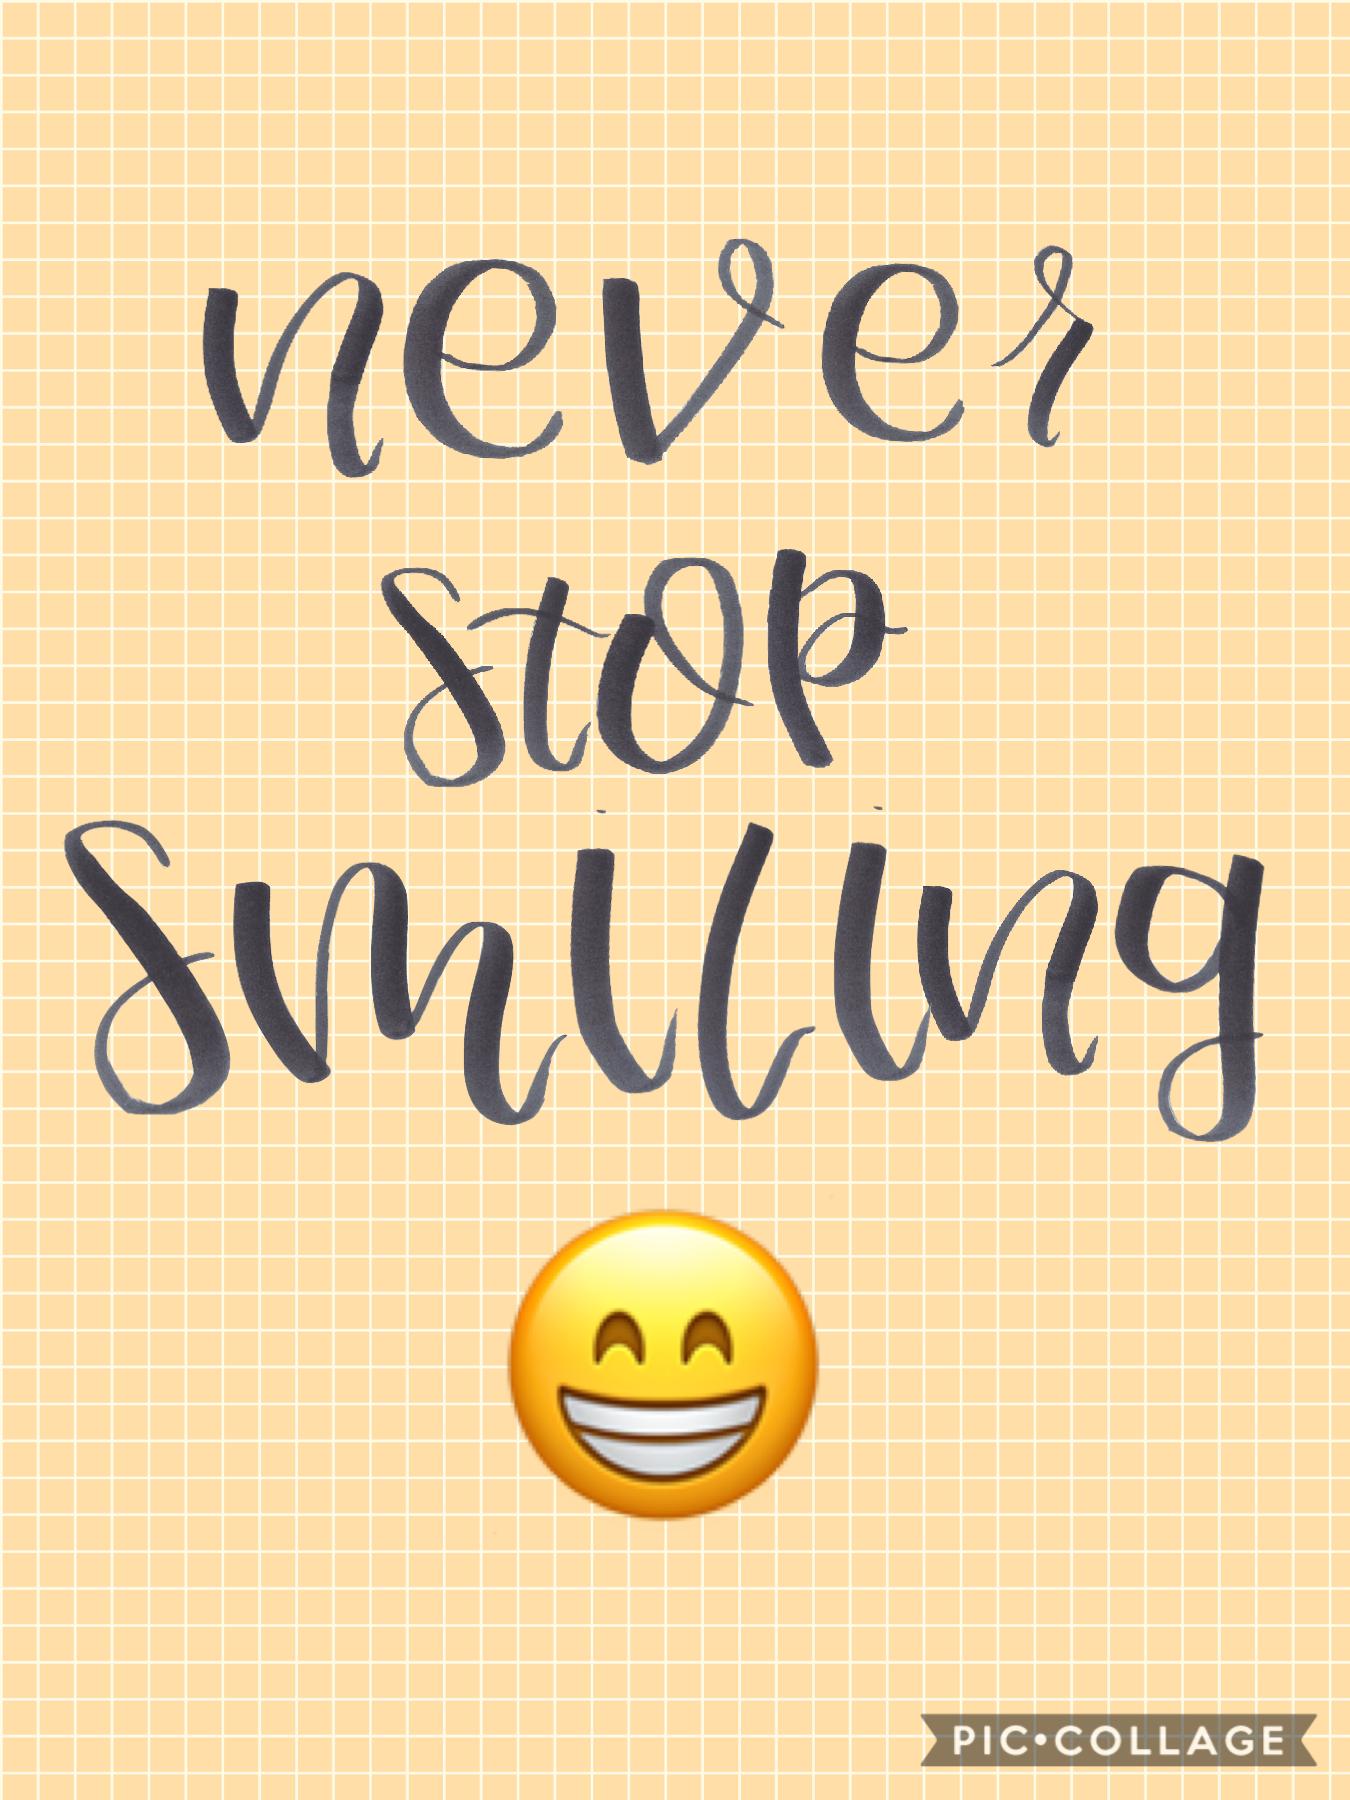 Don’t stop SMILING!!😁